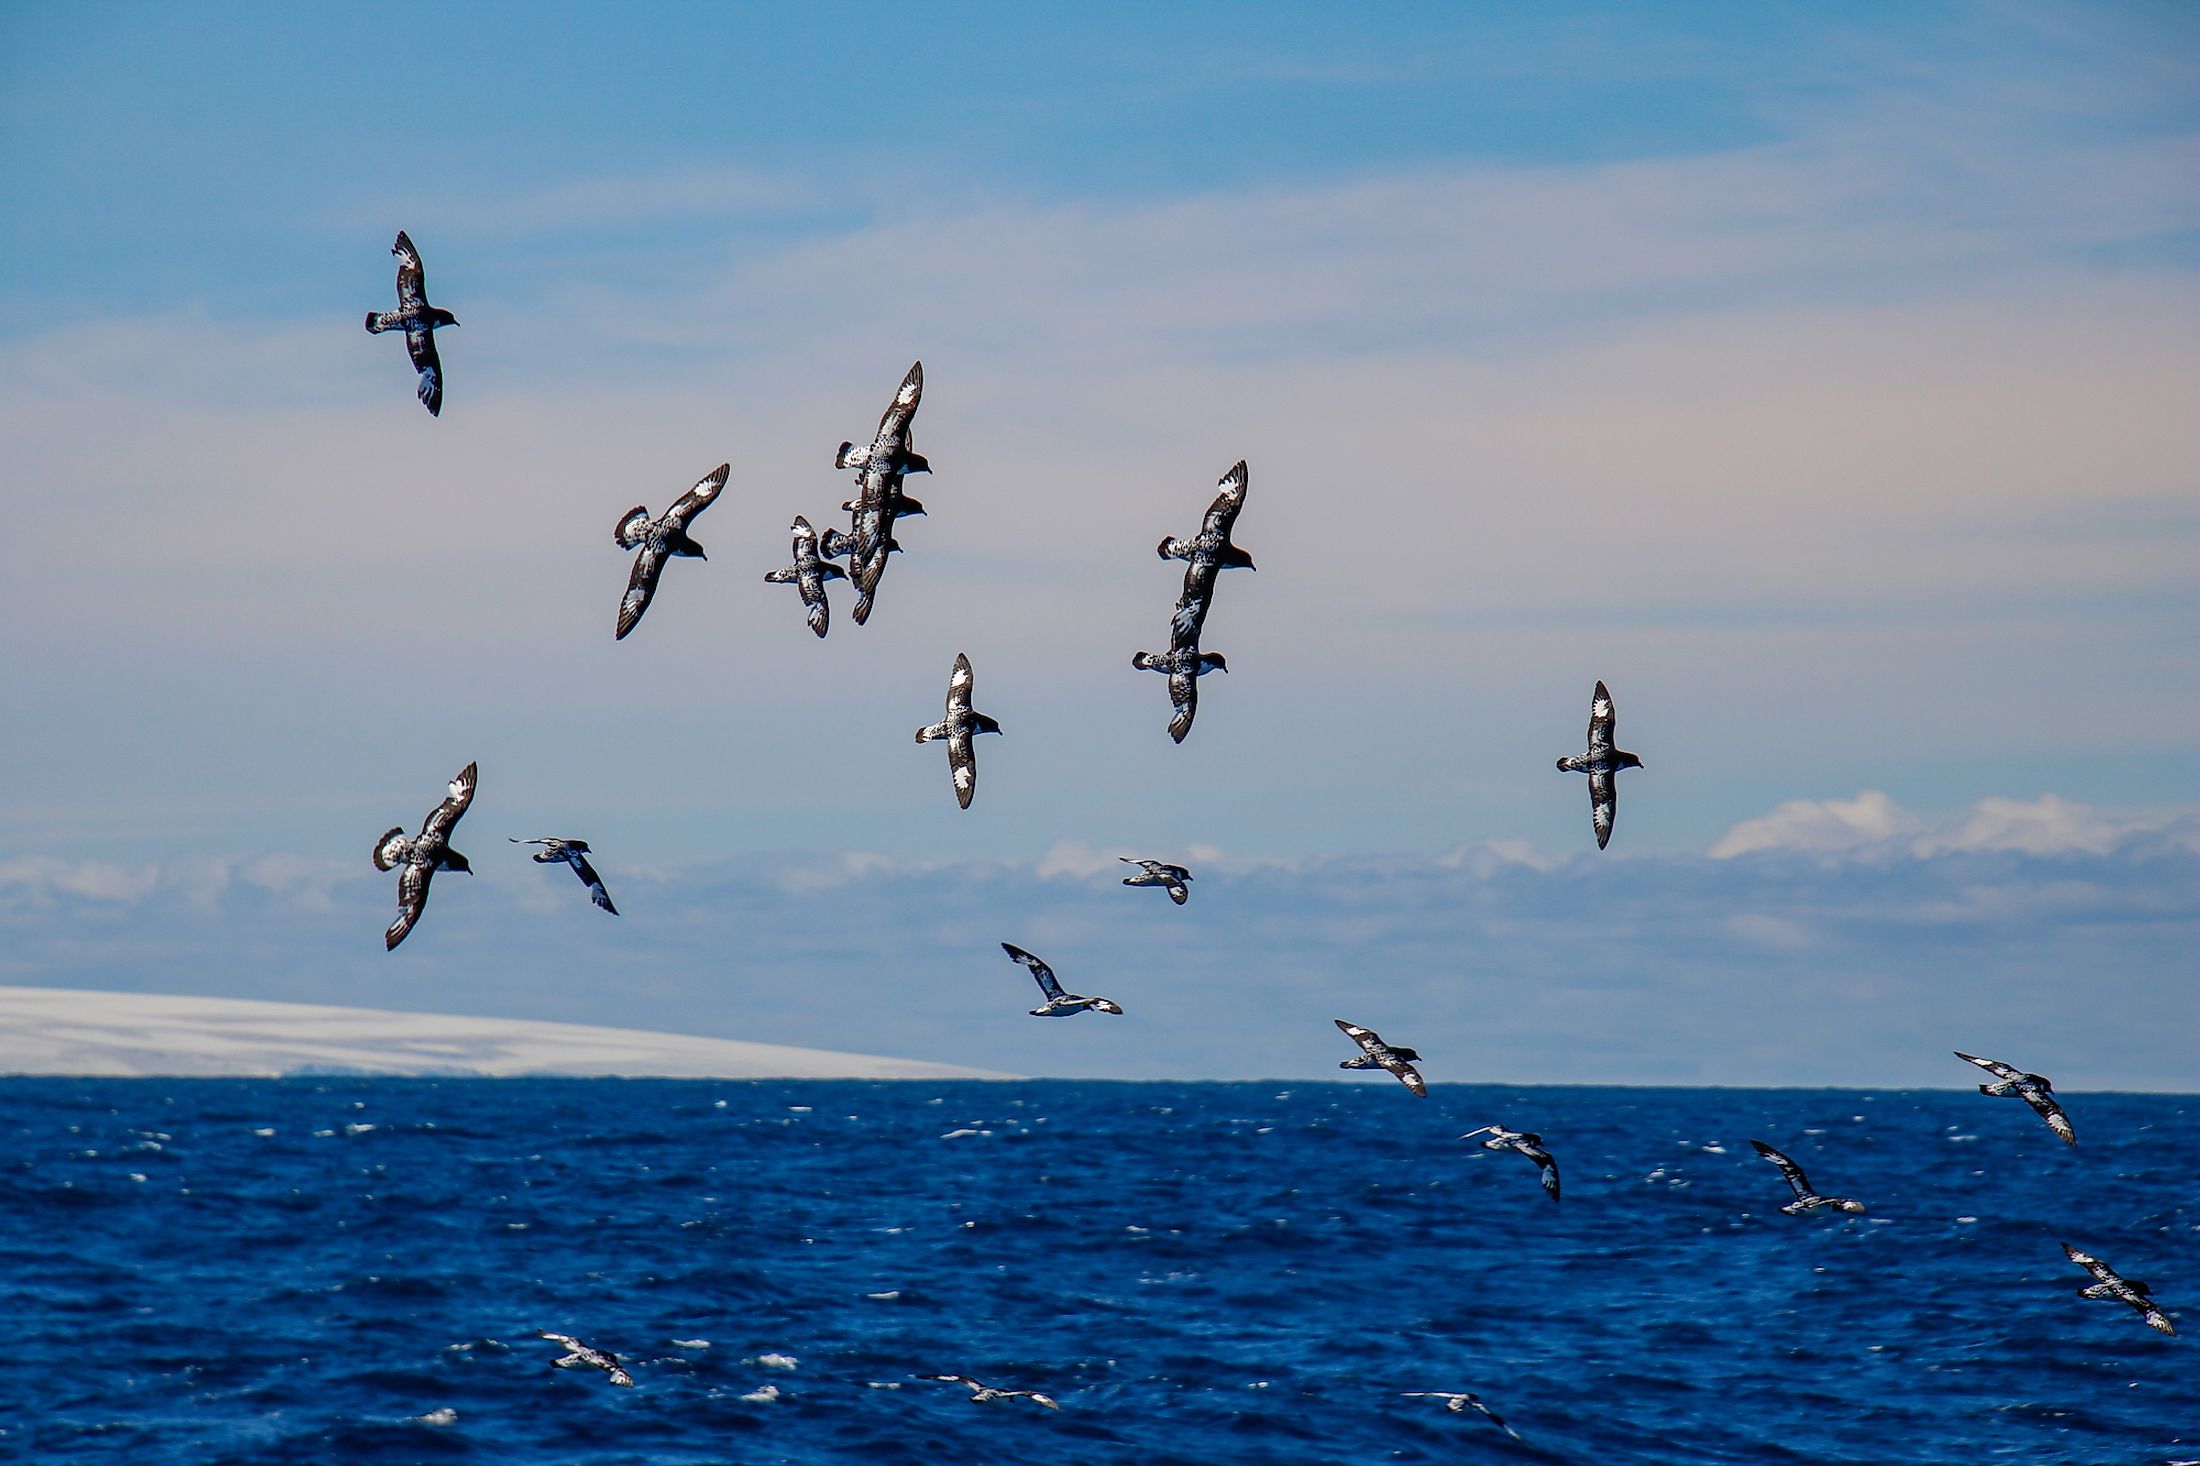 southern ocean Adventure, where life meets a different defination: the southern ocean